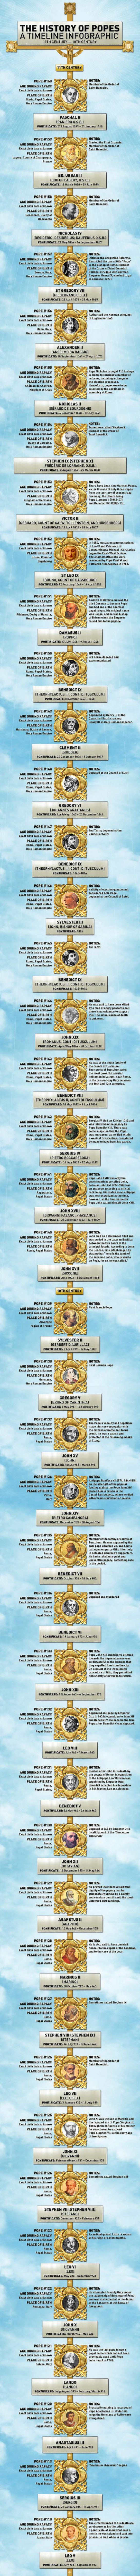 list of popes infographic